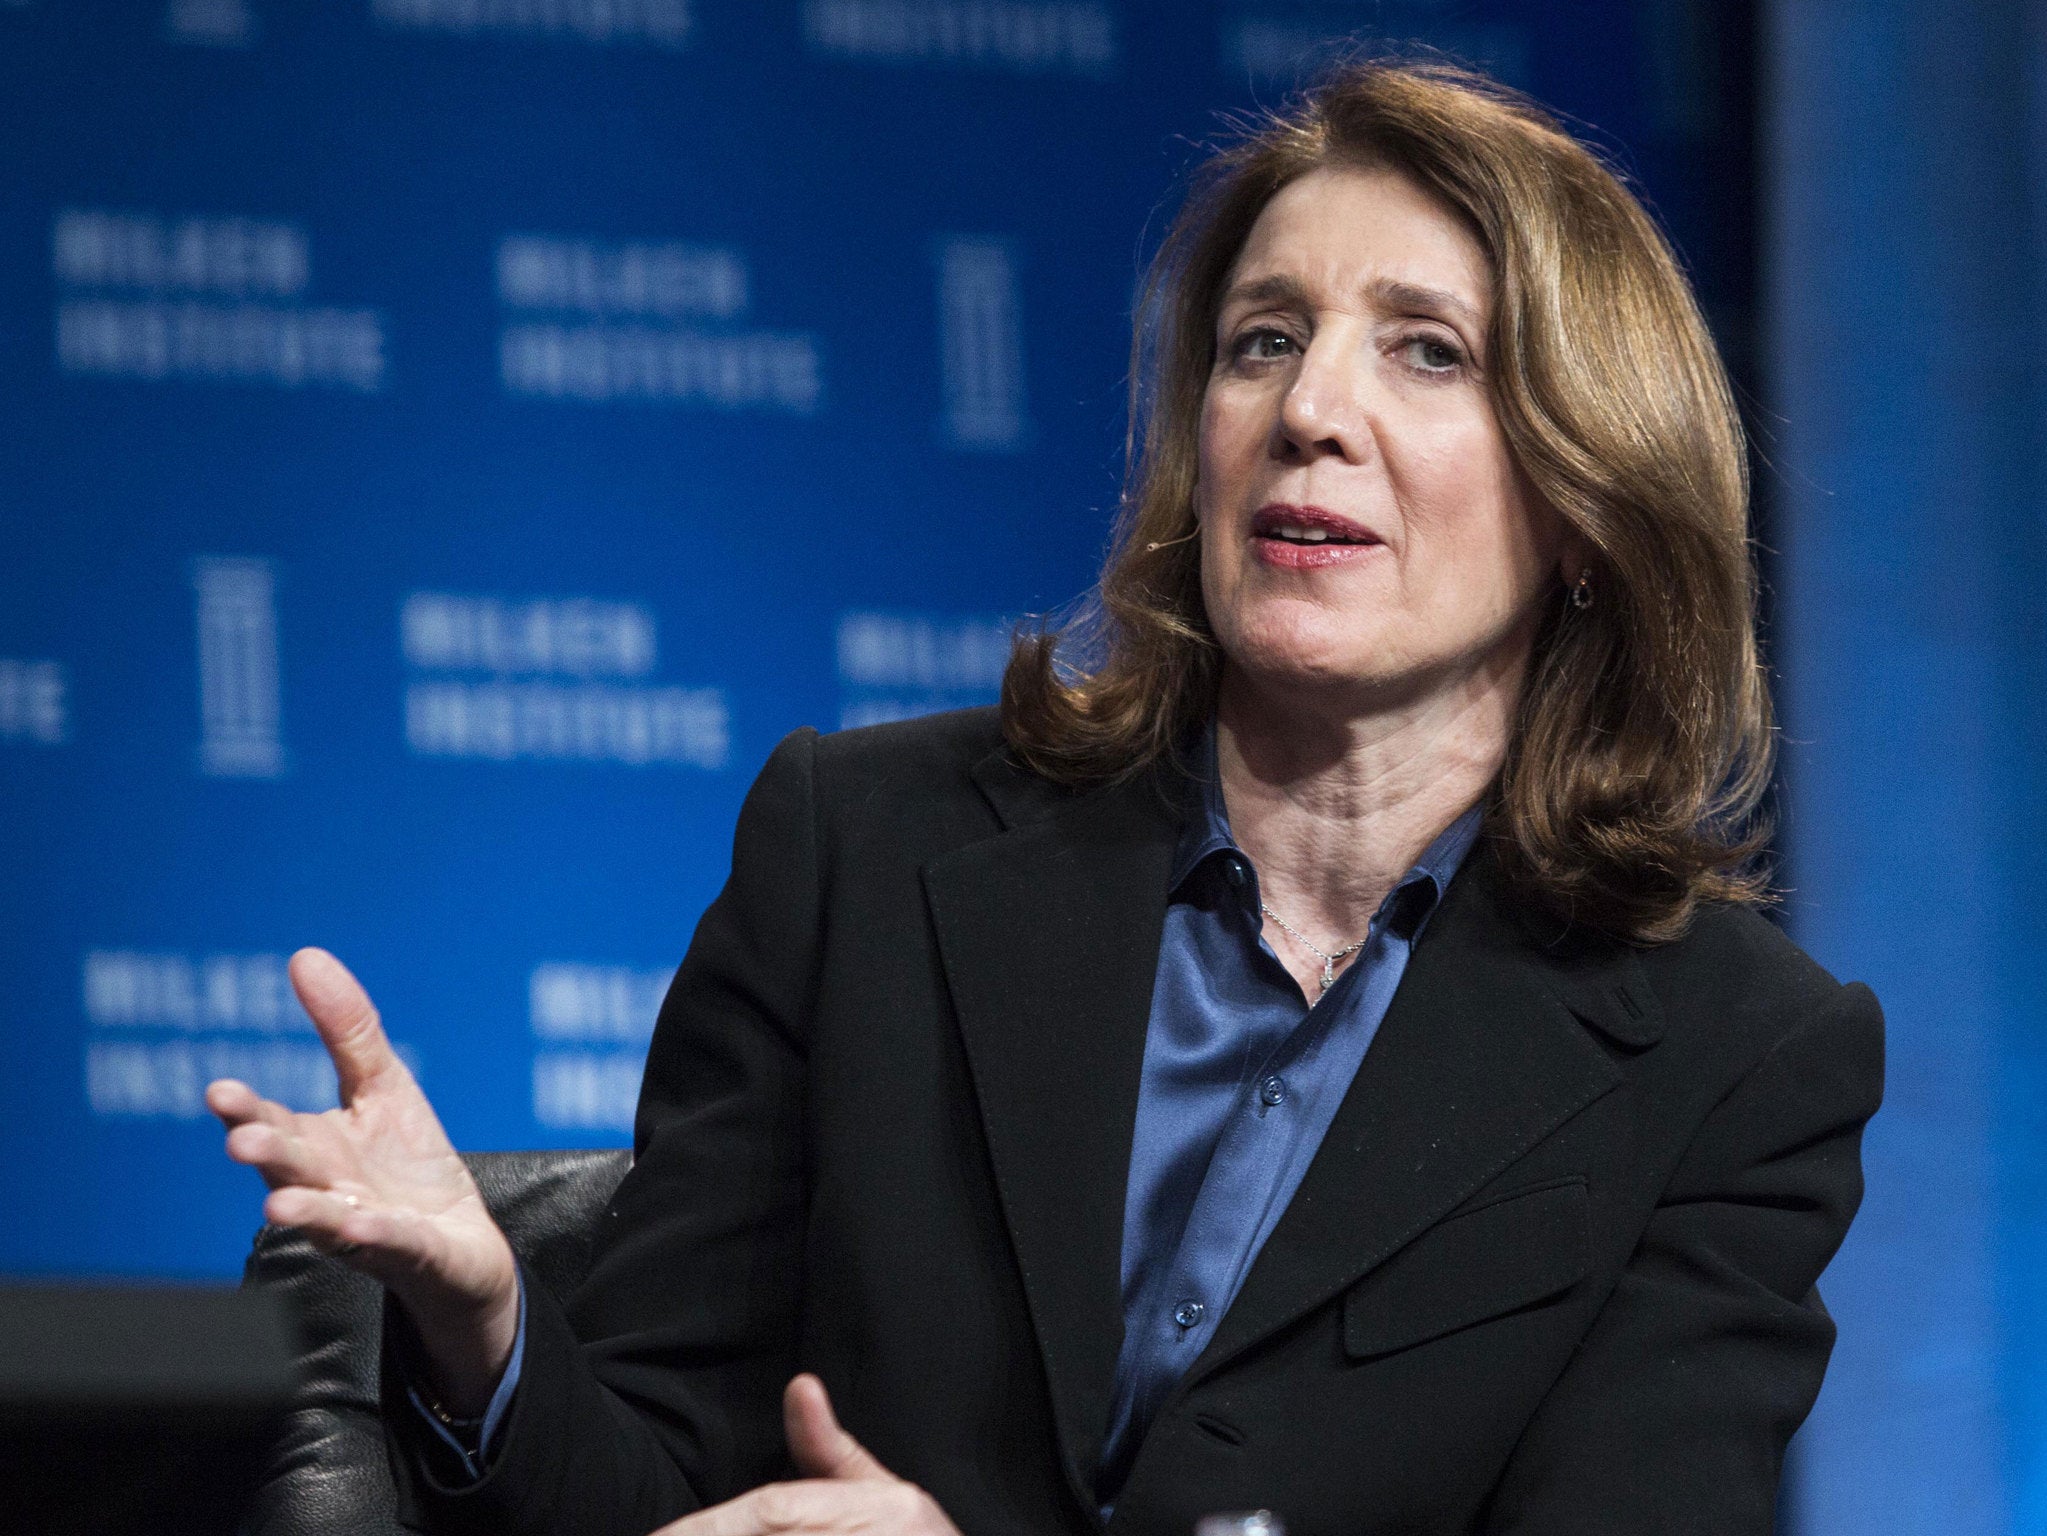 Google has made headlines in the gender equality debate for appointing Ruth Porat, one of the most powerful women on Wall Street, as its chief financial officer